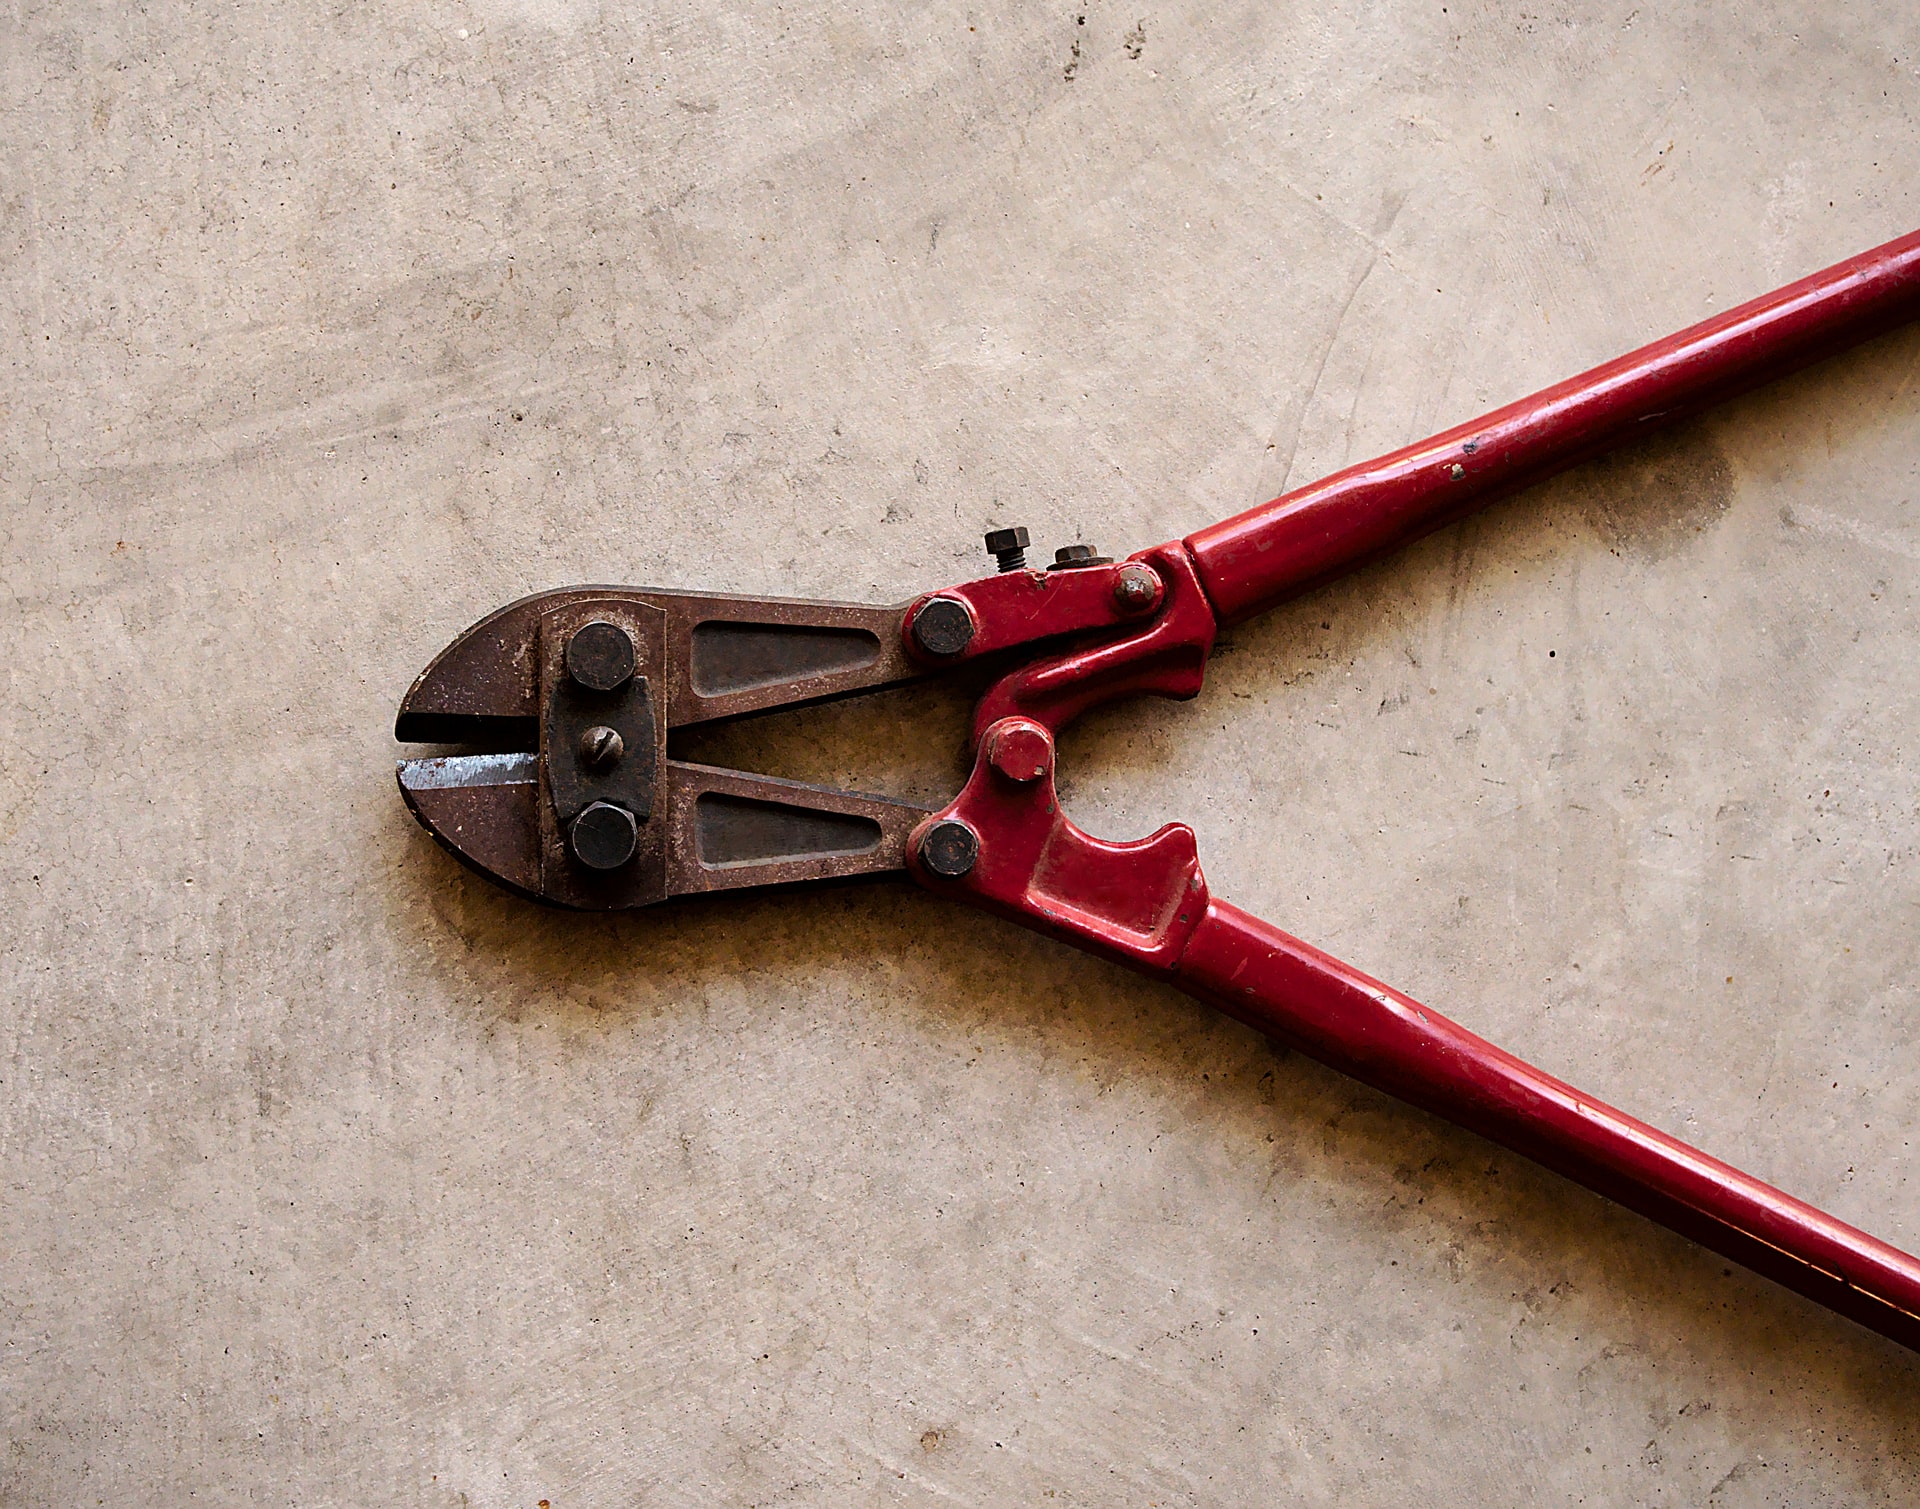 A wrench with red handles.